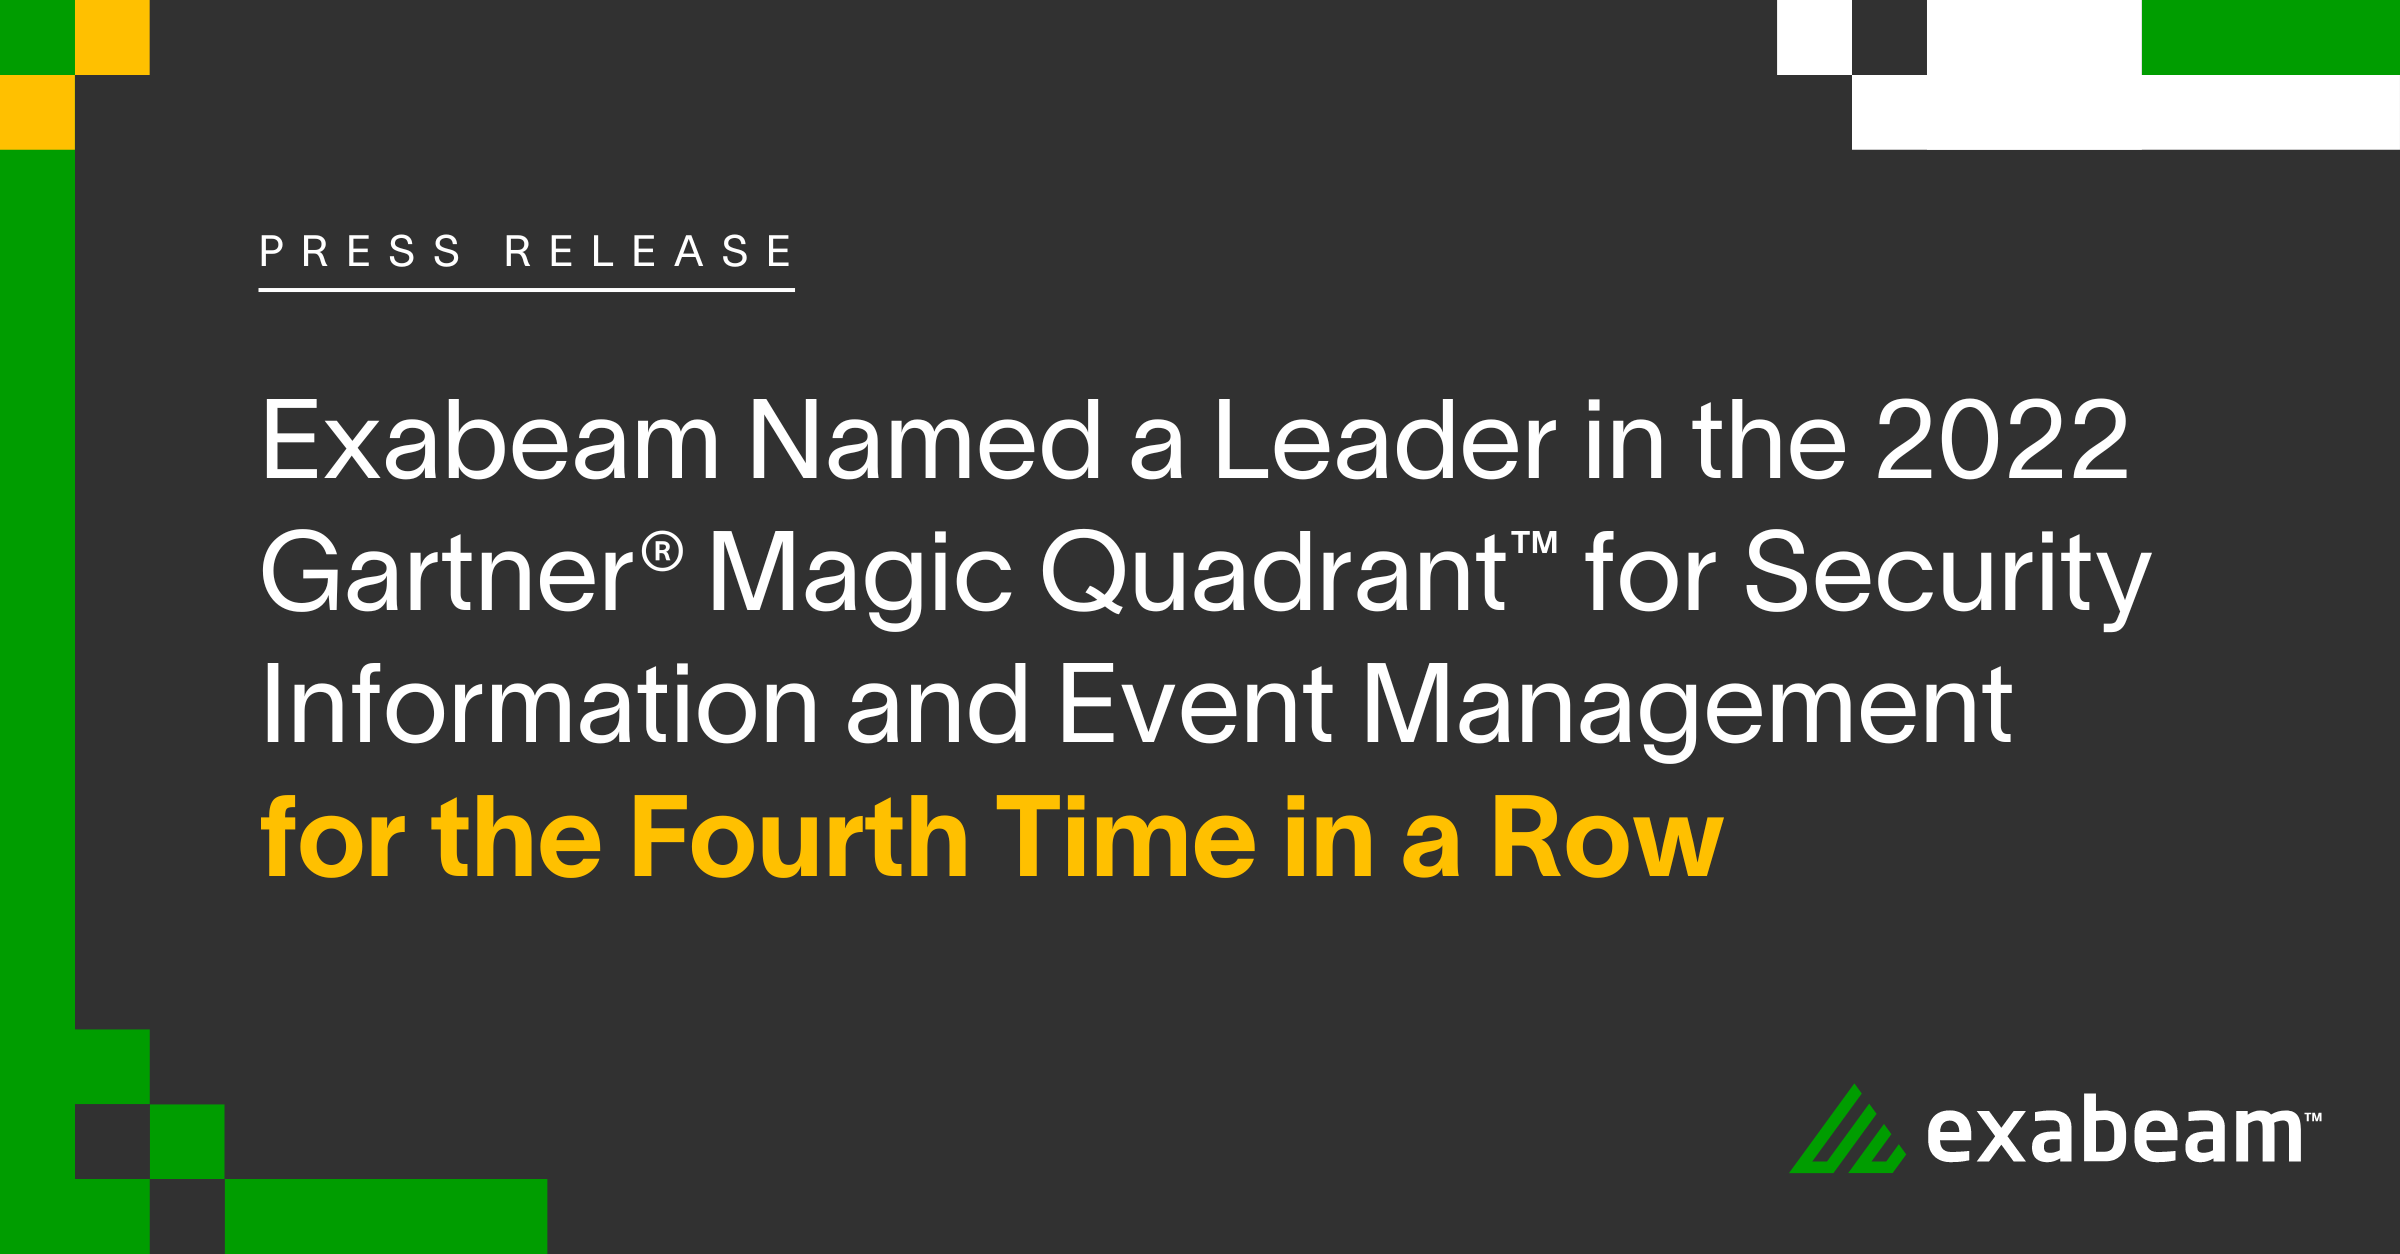 Exabeam Named a Leader in the 2022 Gartner® Magic Quadrant™ for Security Information and Event Management for the Fourth Time in a Row